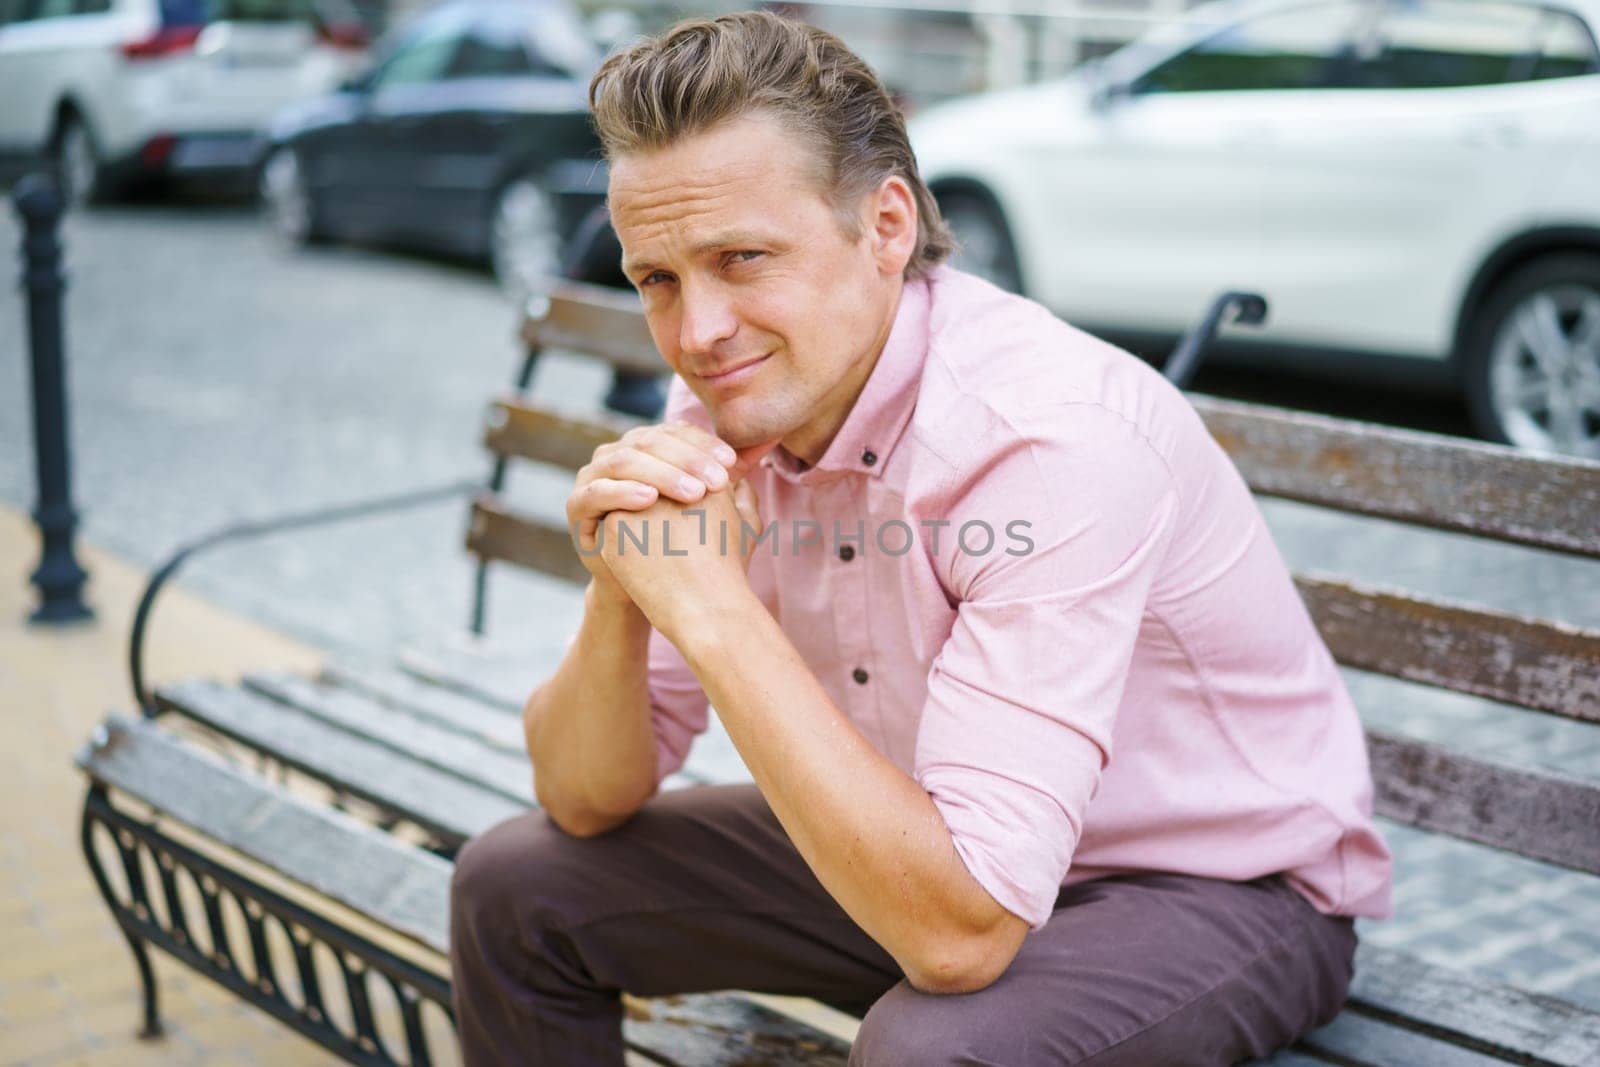 Successful person finding moment of respite. Man sits thoughtfully on bench, away from urban chaos, engrossed in deep contemplation. . High quality photo